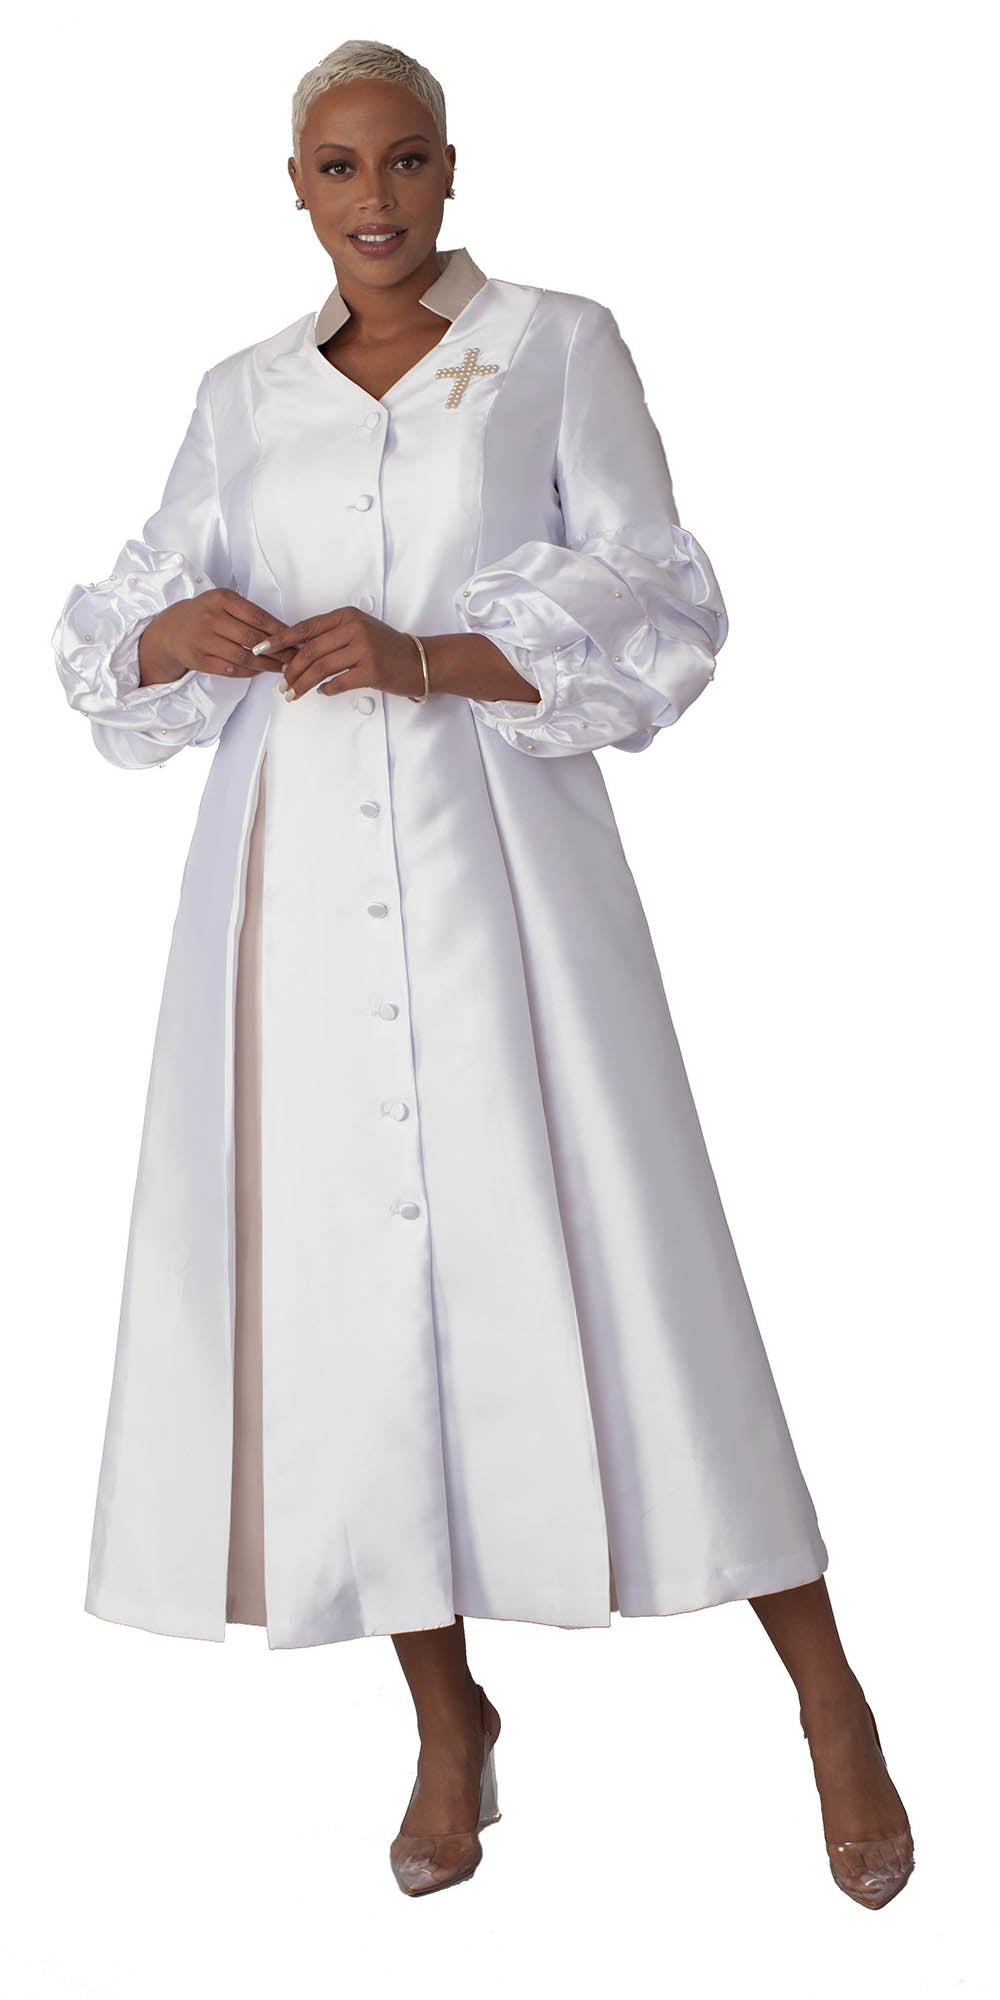 Tally Taylor - 4730 - White Gold - Women's Clergy Robe